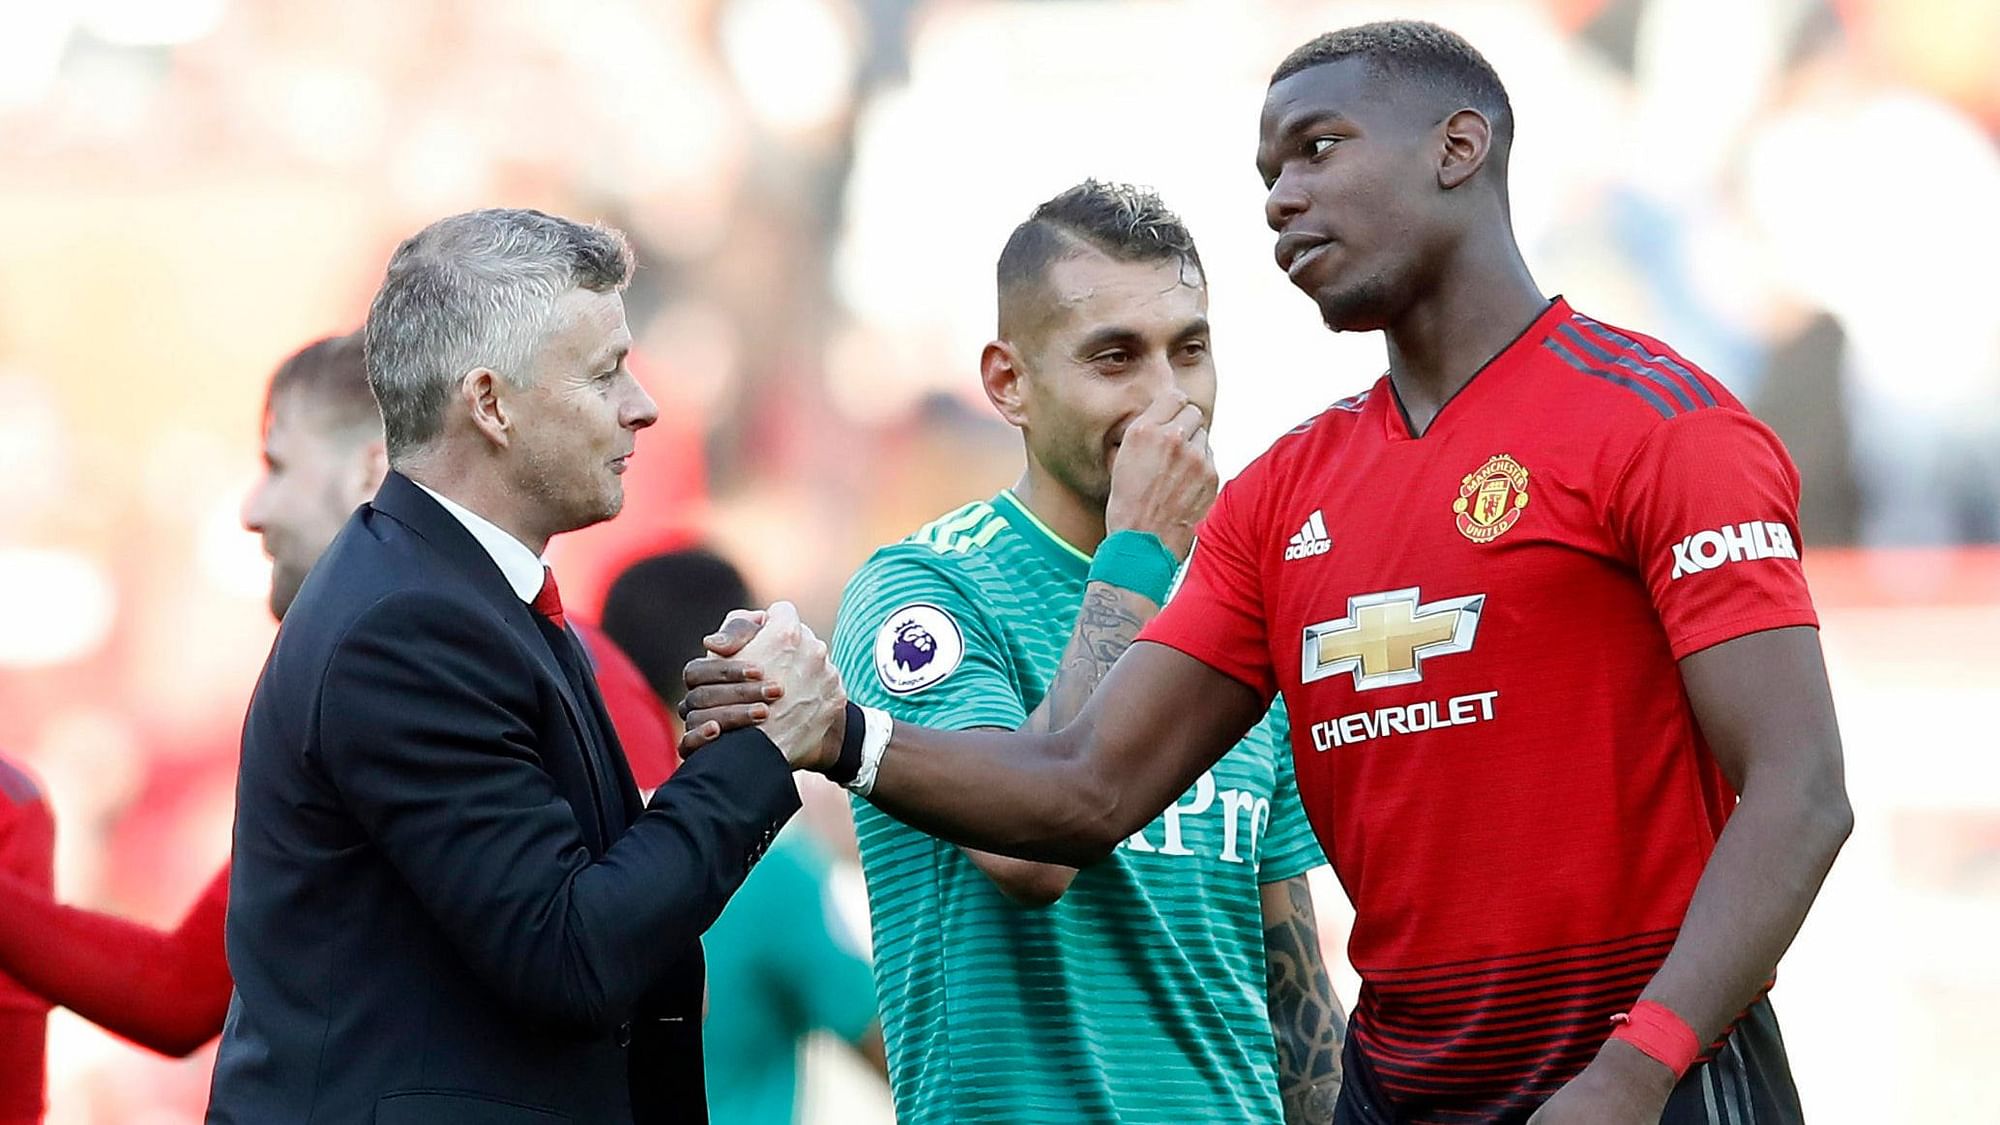 Manchester United manager Ole Gunnar Solskjaer with Paul Pogba after the final whistle during the English Premier League soccer match between Manchester United and Watford at Old Trafford Stadium, Manchester, England.